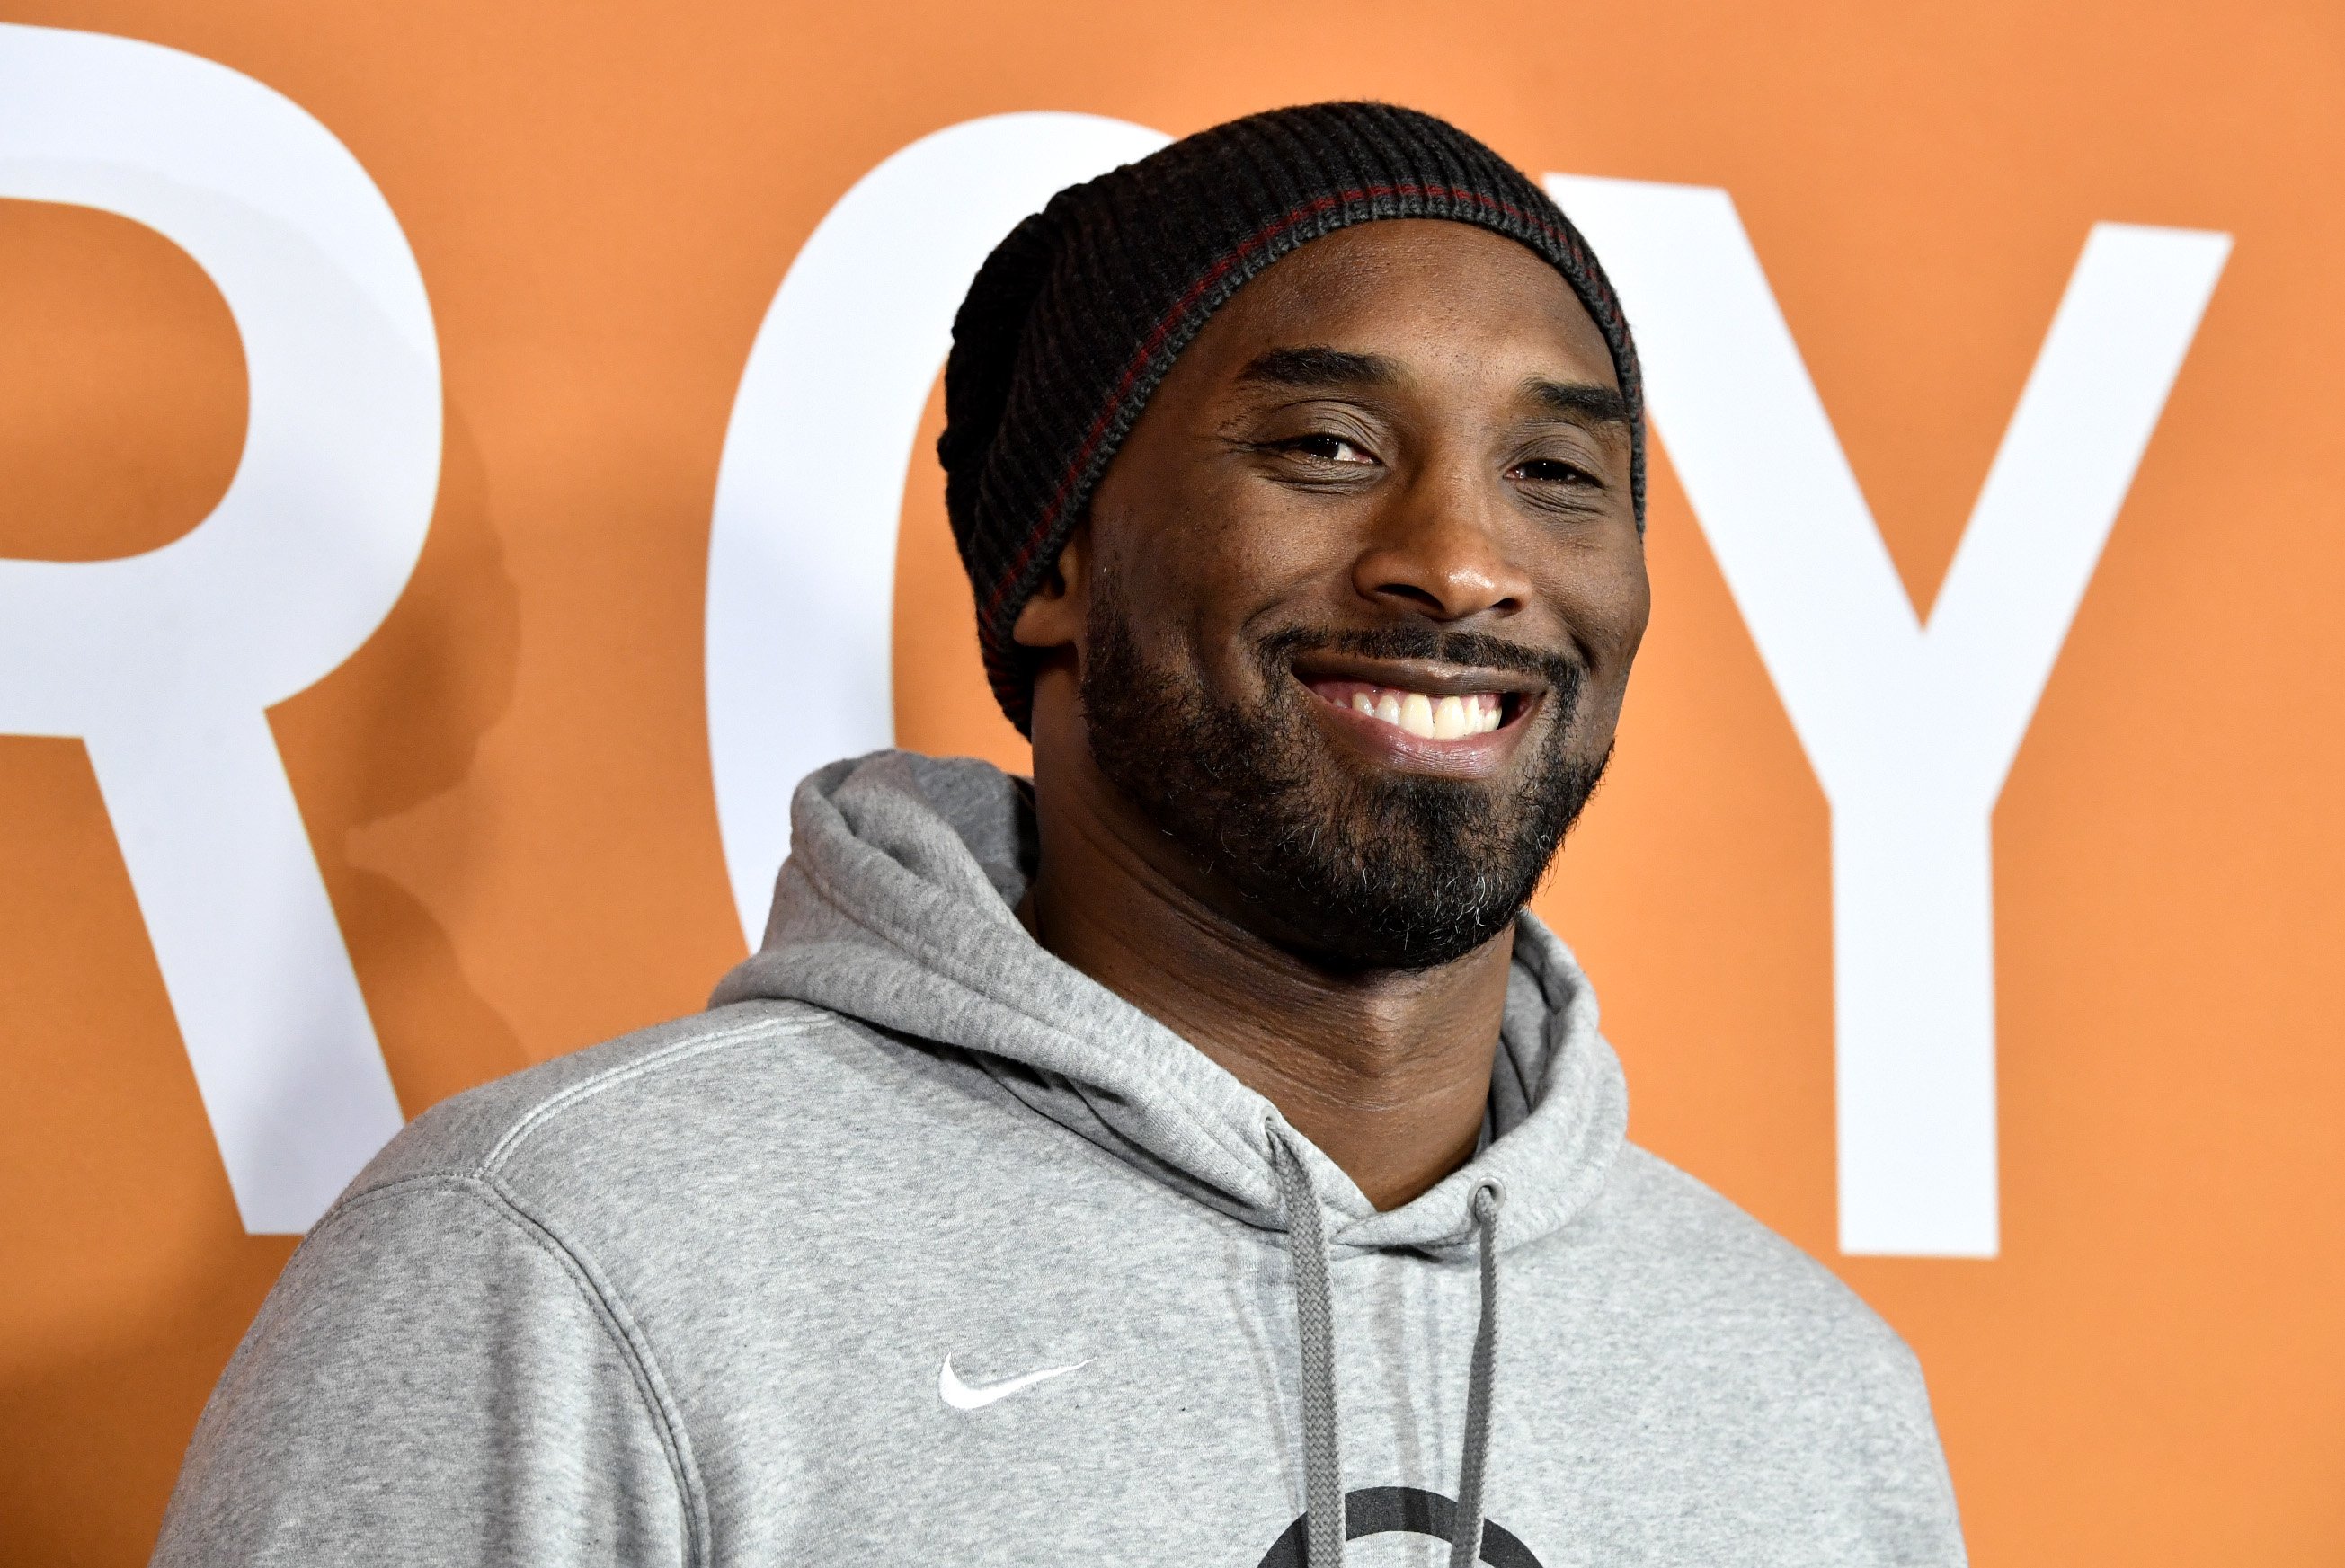 Kobe Bryant attends the LA Community Screening Of Warner Bros Pictures' "Just Mercy" on January 06, 2020, in Los Angeles, California. | Source: Getty Images.